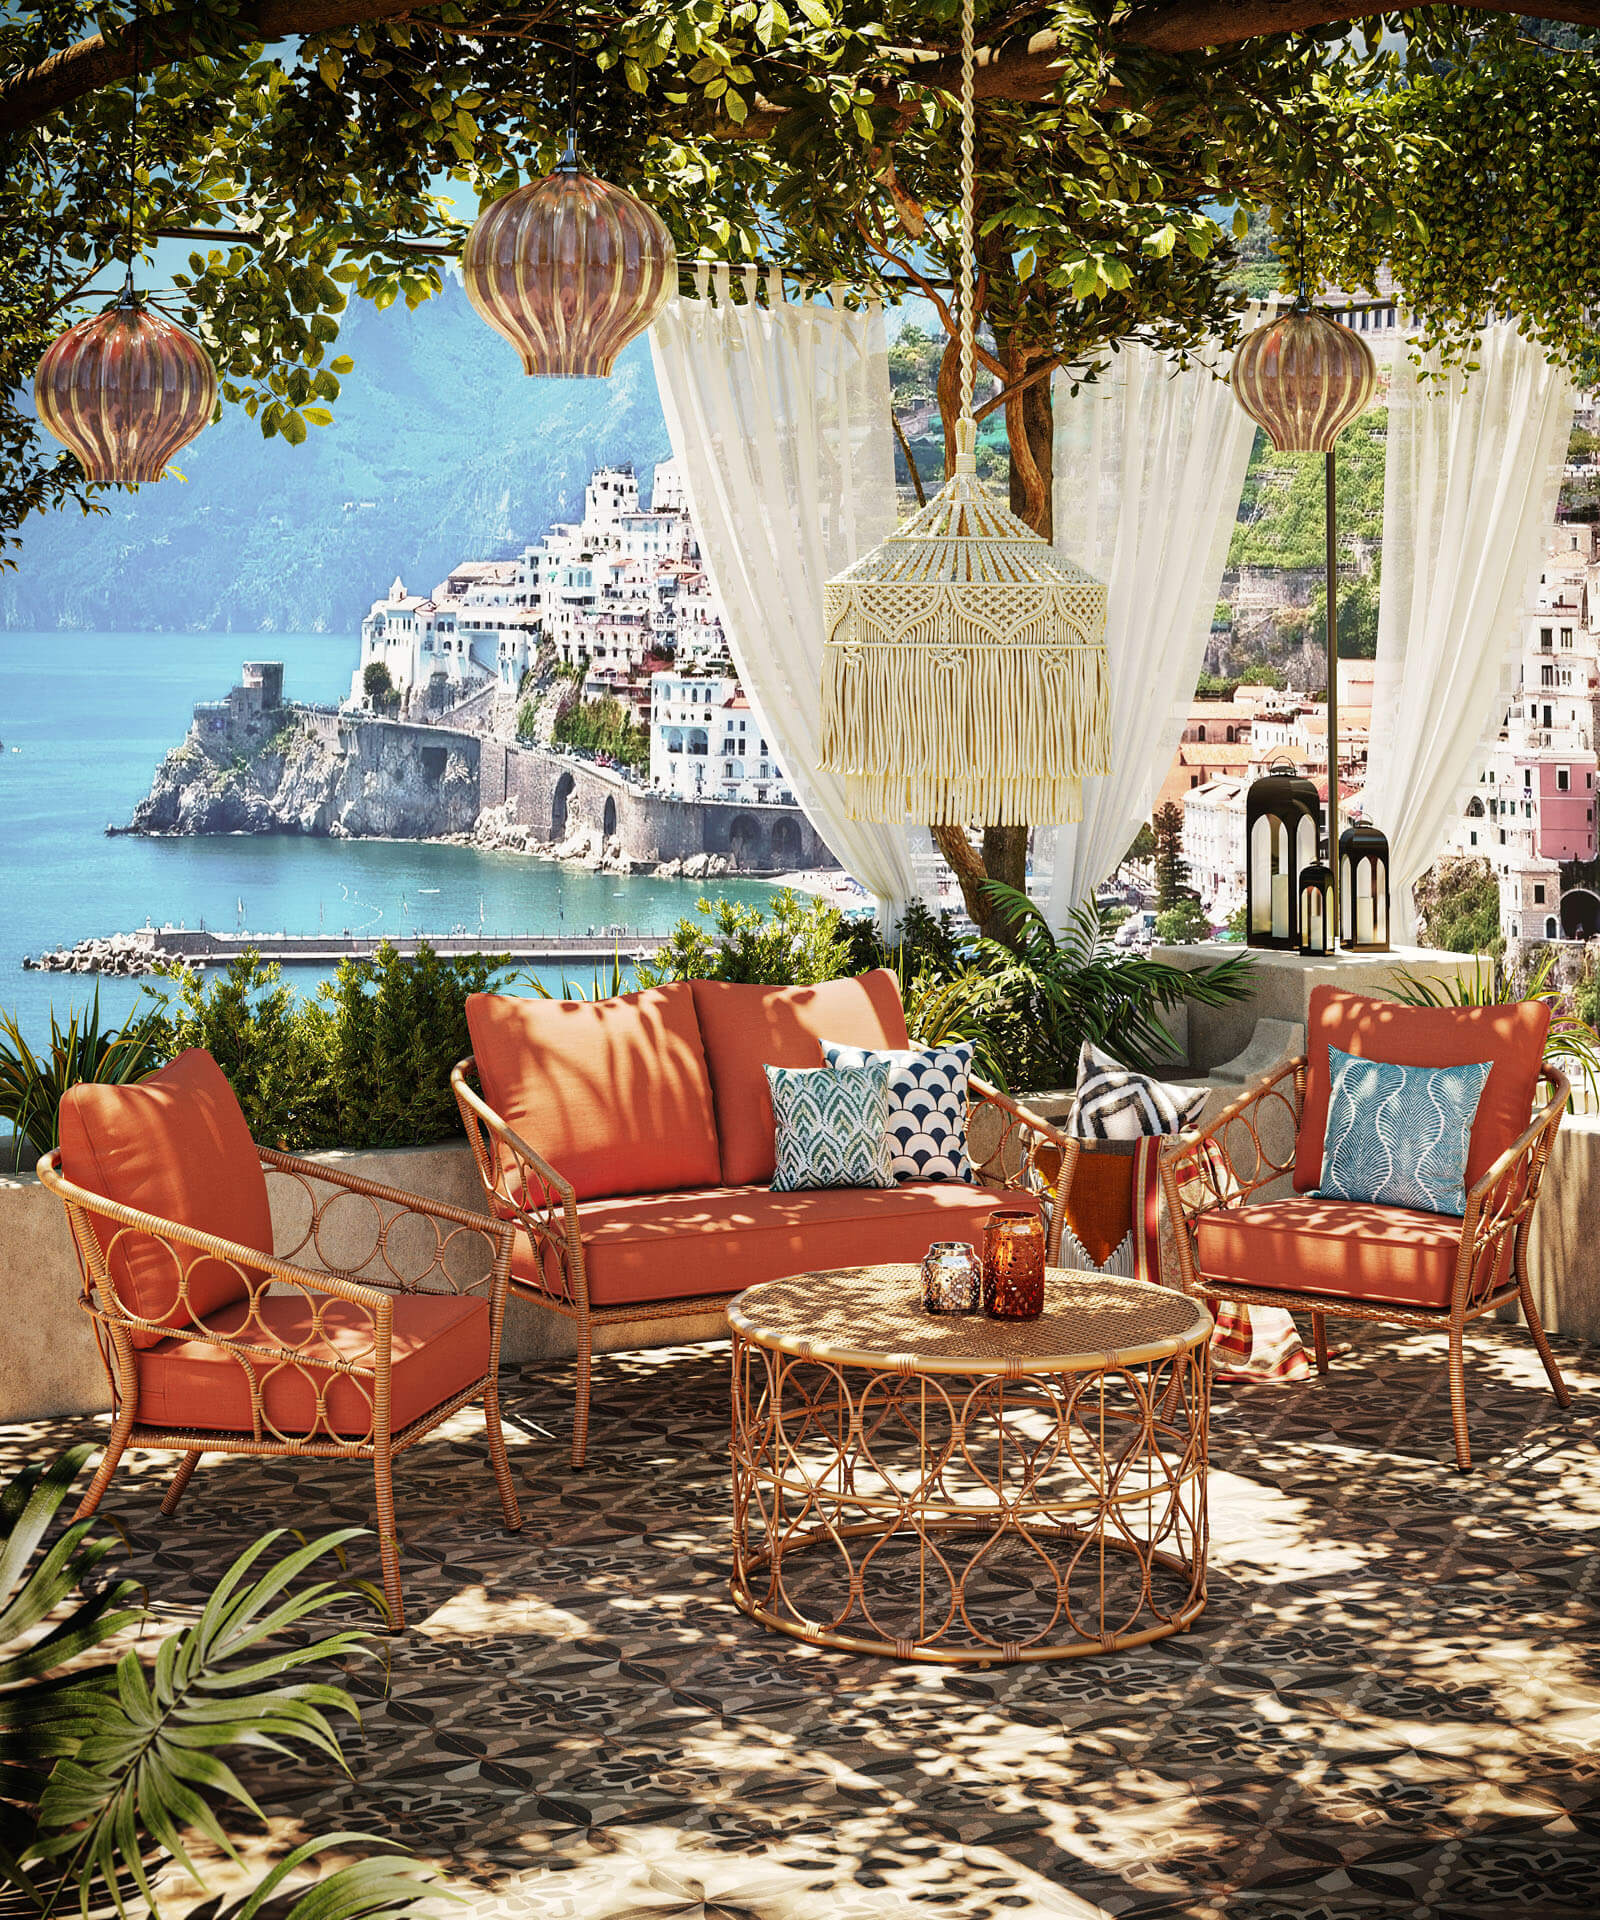 Terrace CGI Environment for Outdoor Products